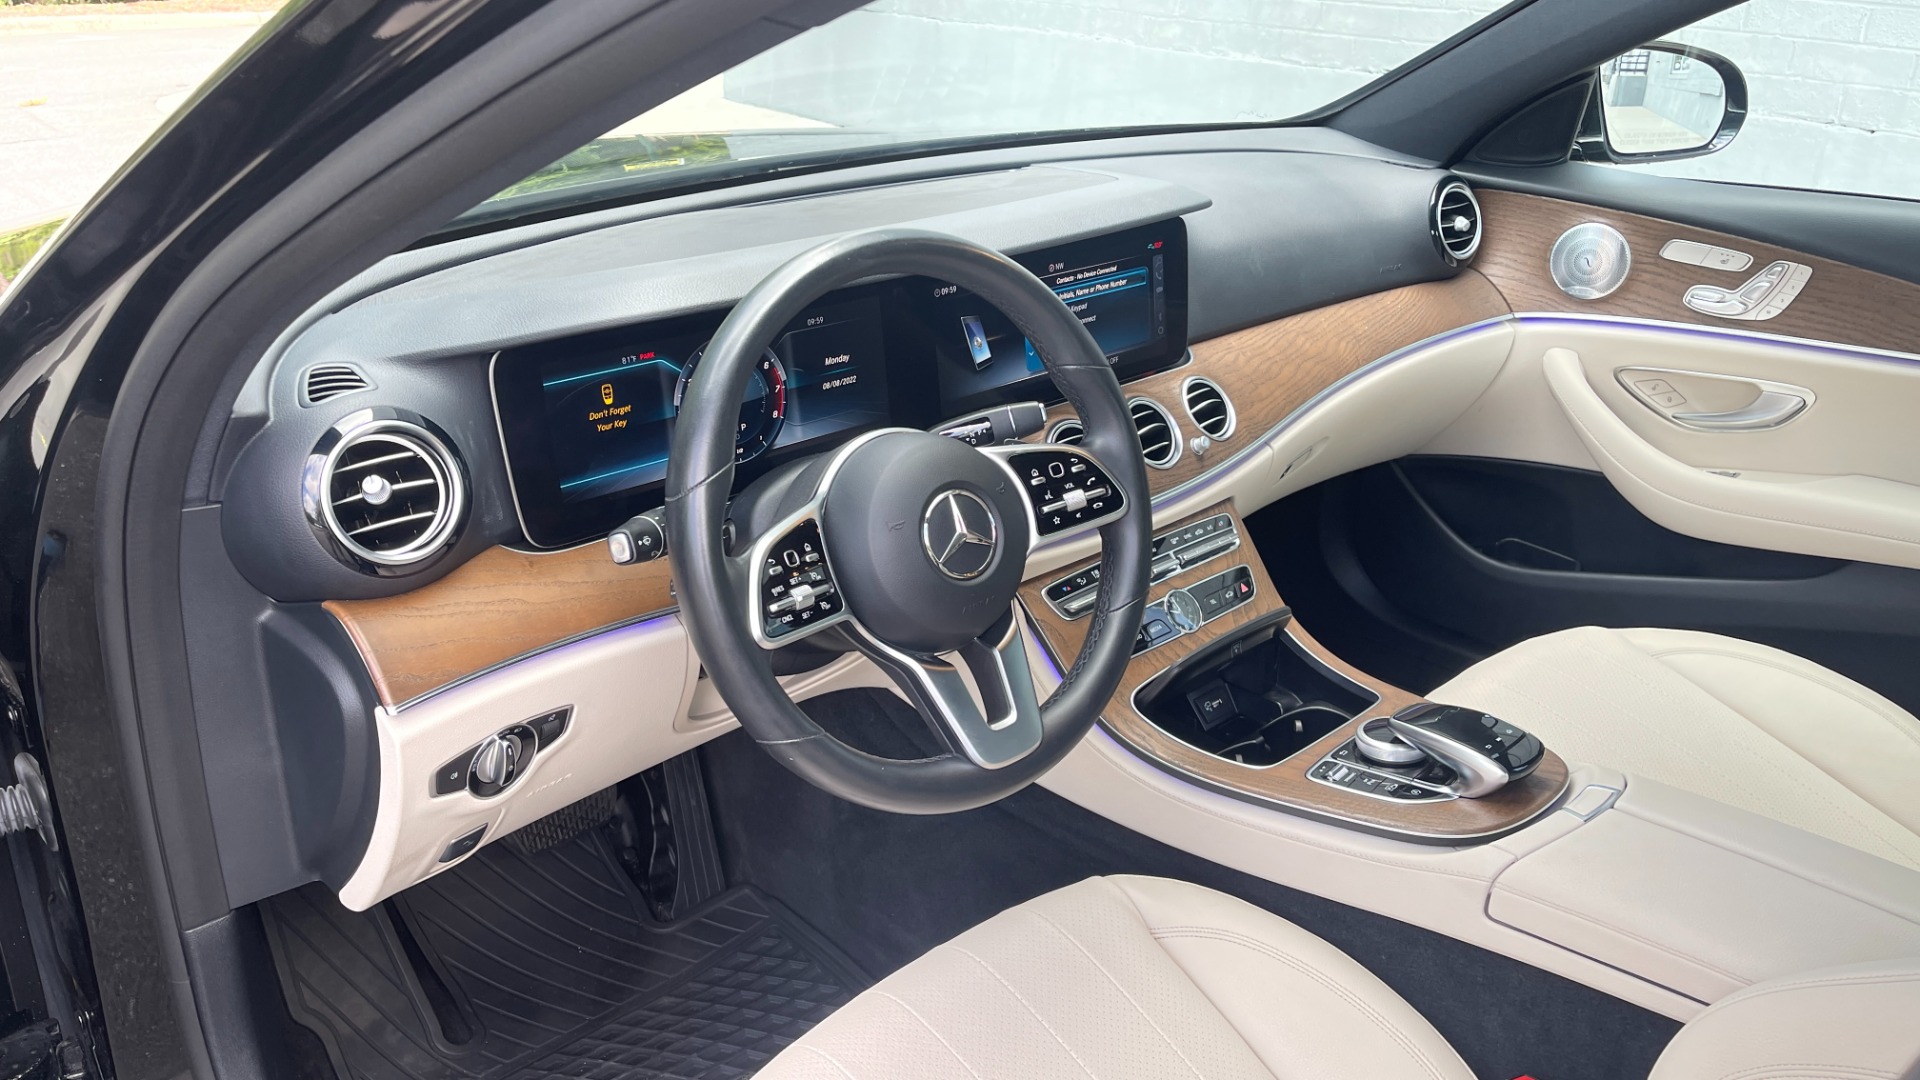 Used 2020 Mercedes-Benz E-Class E 350 / 4MATIC / AMG LINE / BURMESTER SOUND / PANORAMIC ROOF for sale $52,999 at Formula Imports in Charlotte NC 28227 9